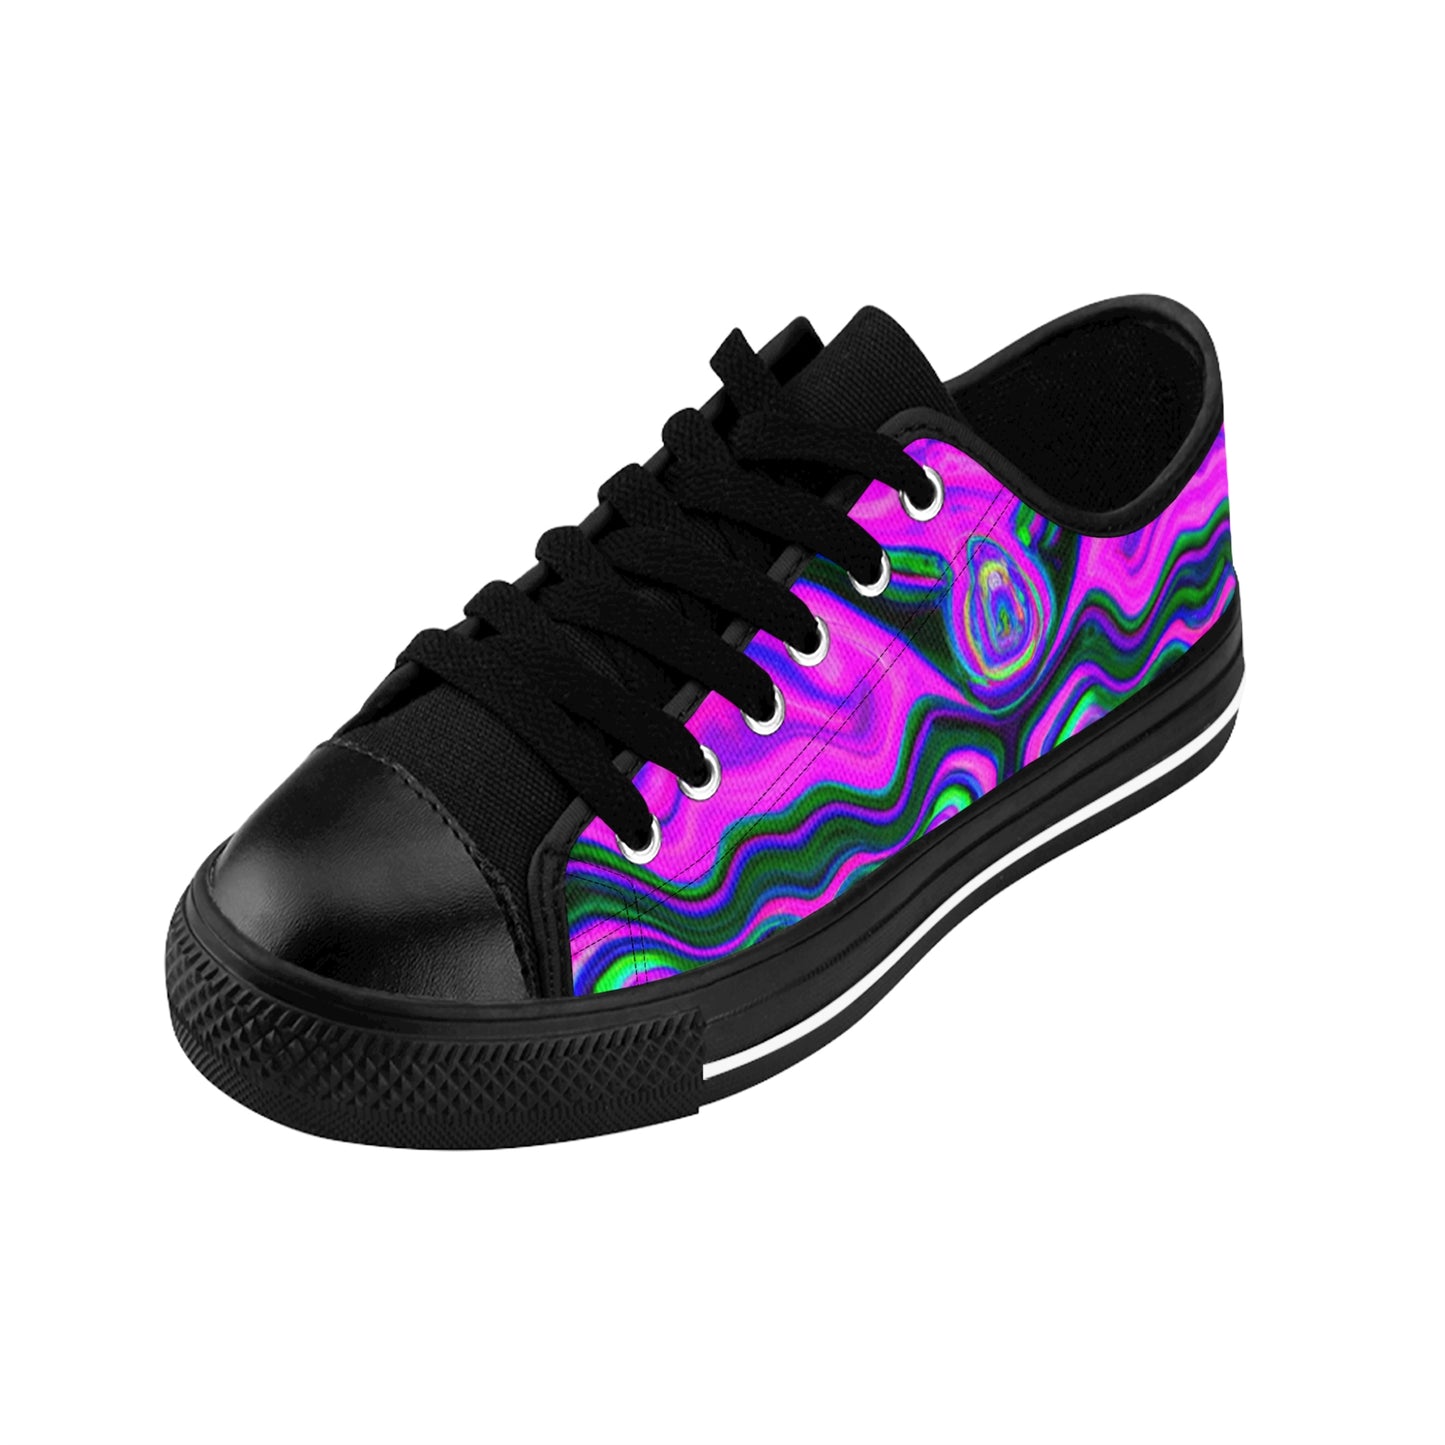 Damian le Cuissardier - Psychedelic Low Top